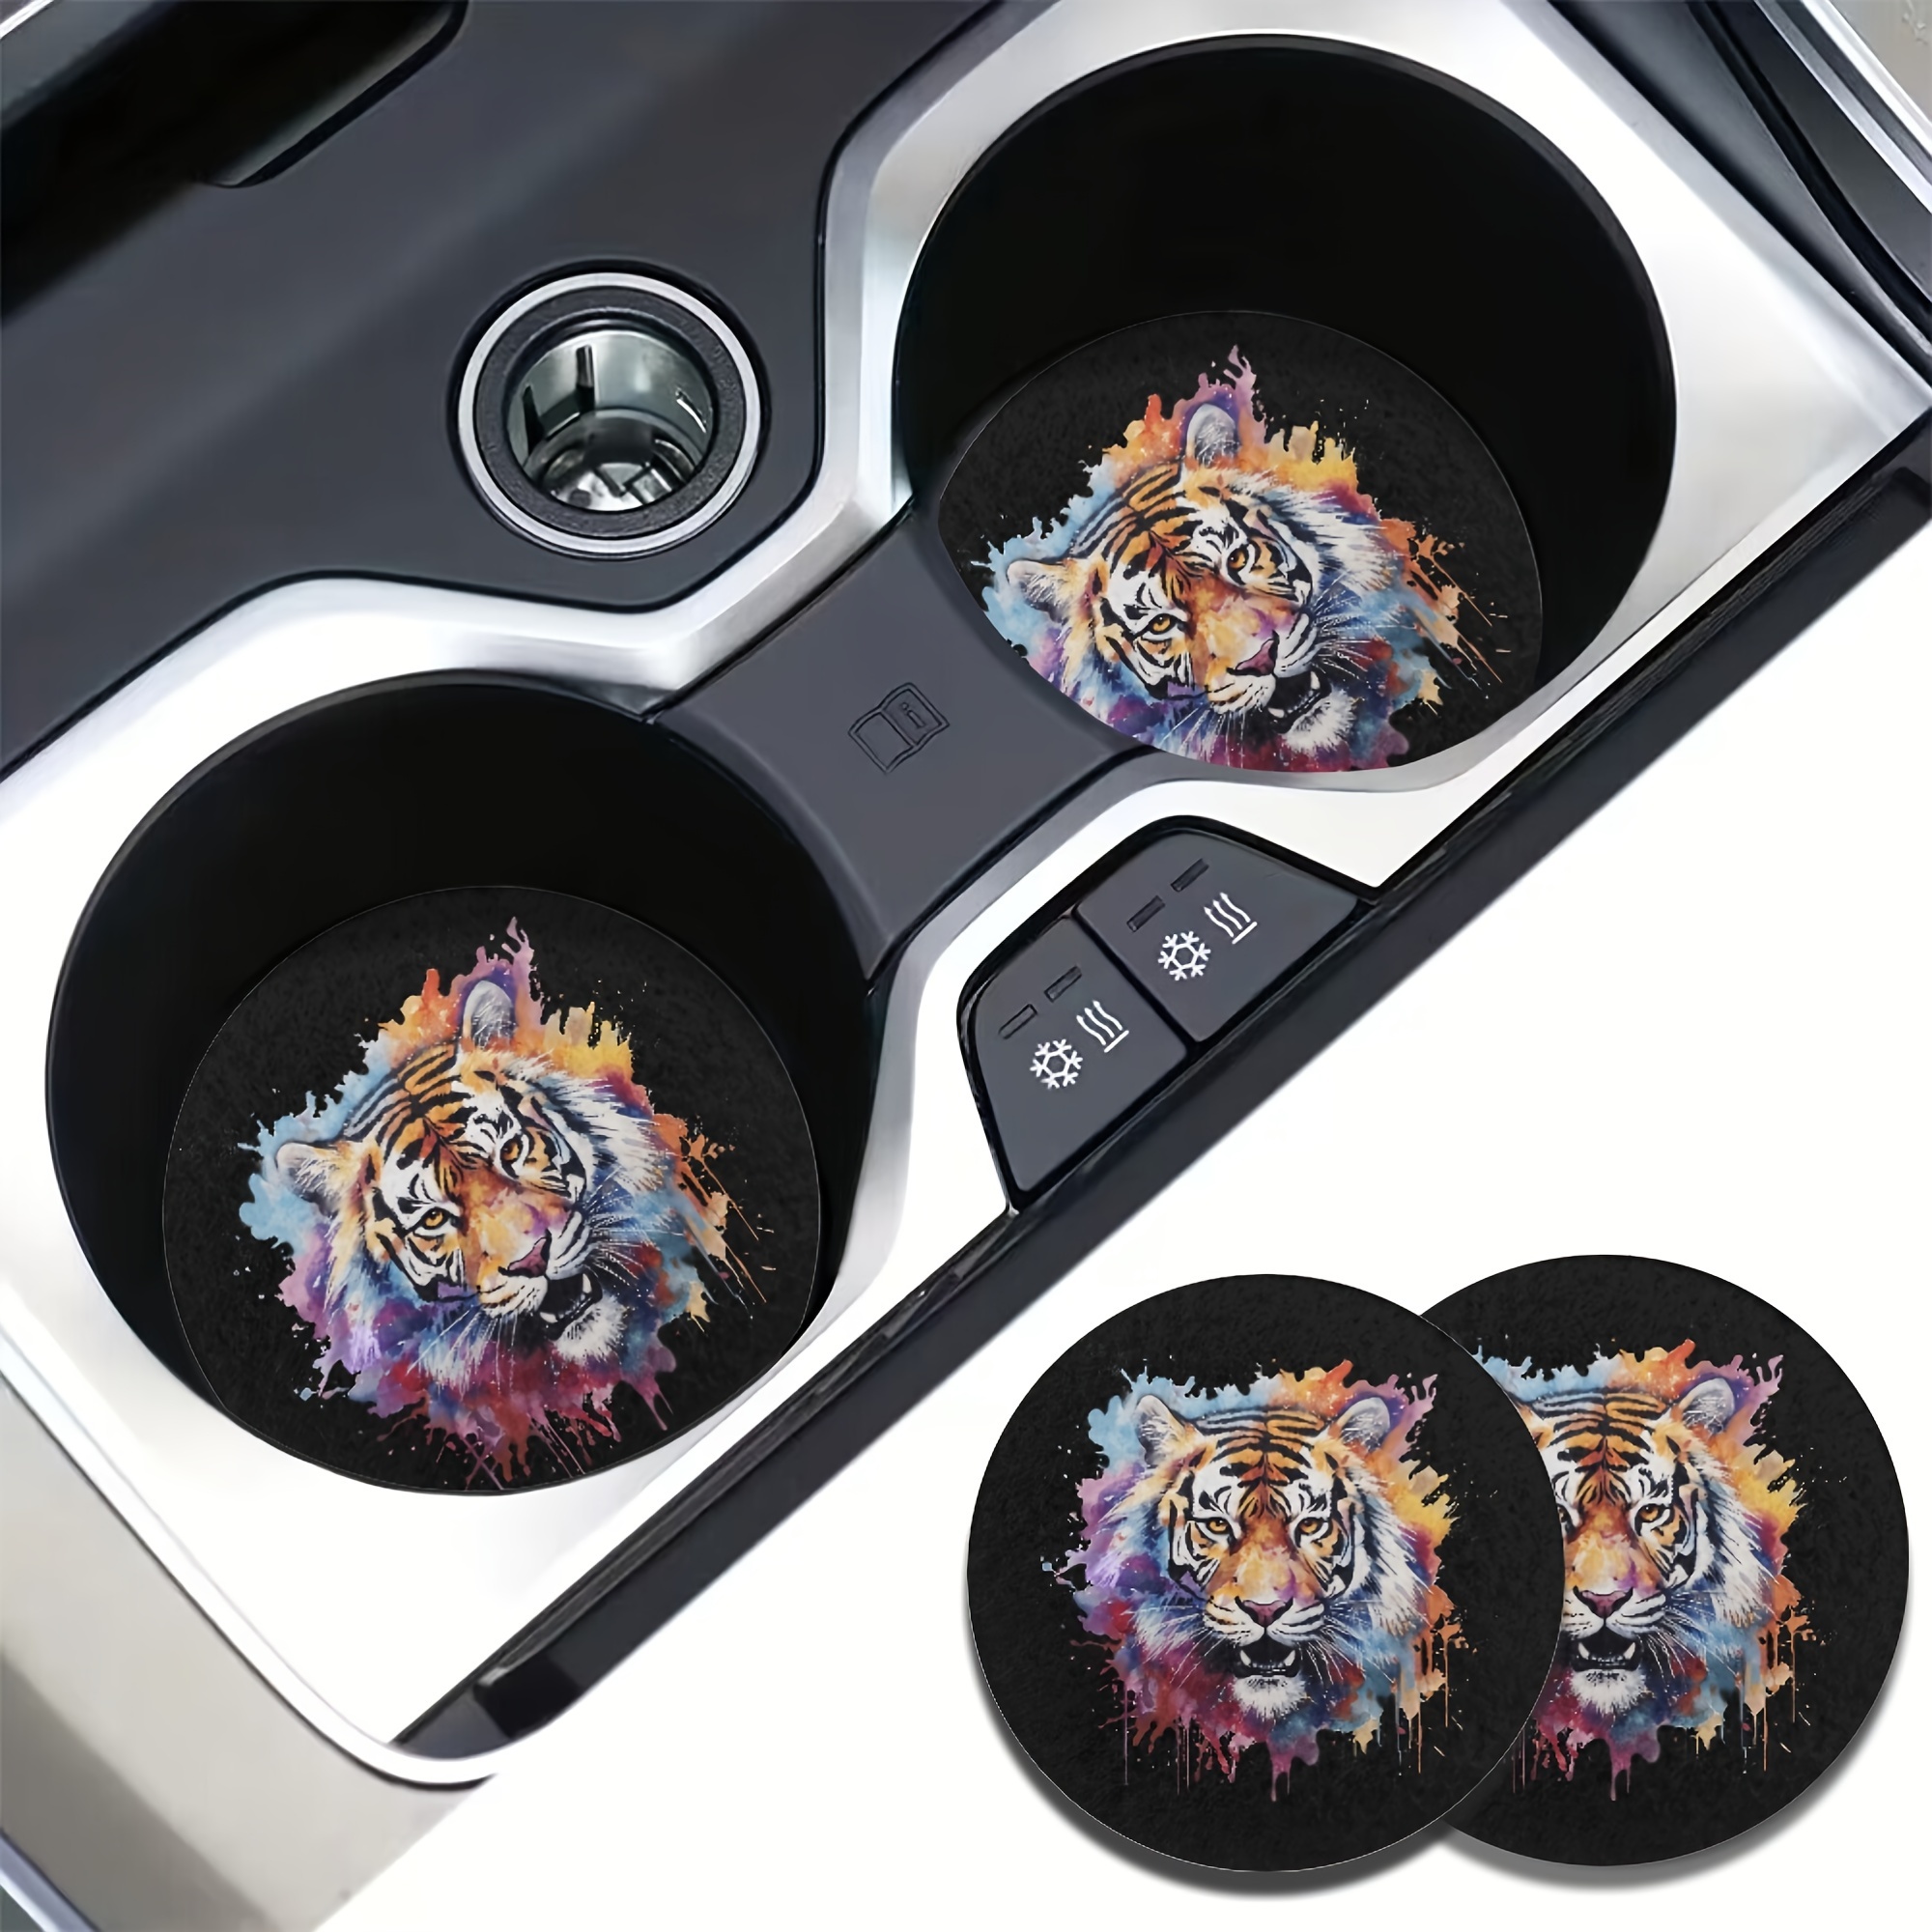 2pcs Lion-Themed Absorbent Car Cup Holder Coaster Mats - Car Interior  Accessories For Men & Women, Water Cup Coasters For Car Vehicles & Home  Desk